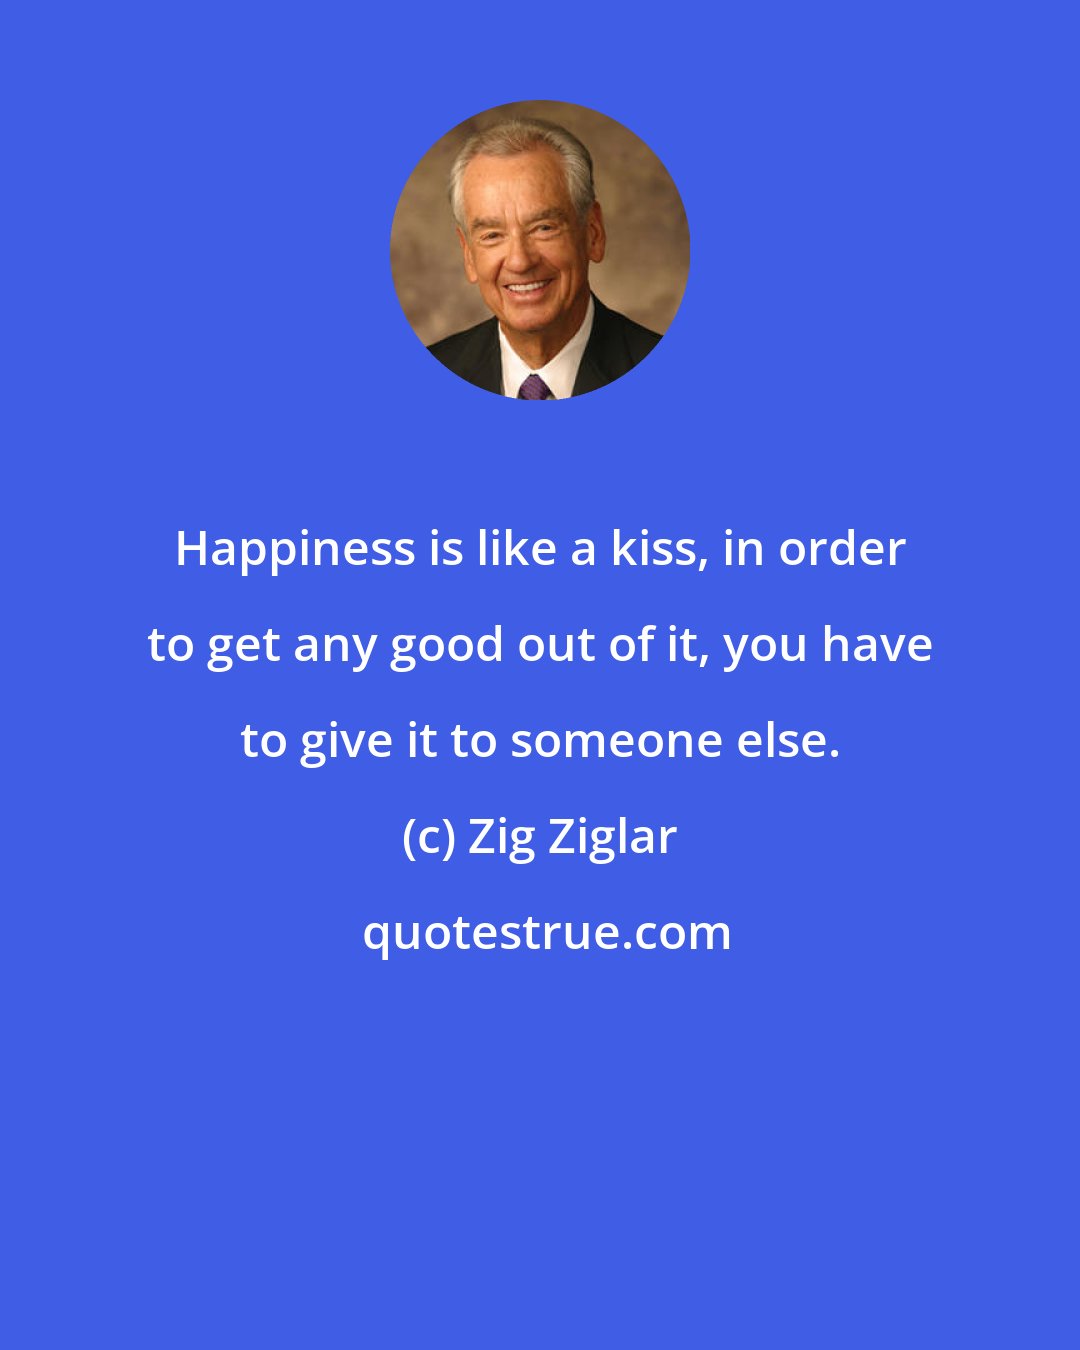 Zig Ziglar: Happiness is like a kiss, in order to get any good out of it, you have to give it to someone else.